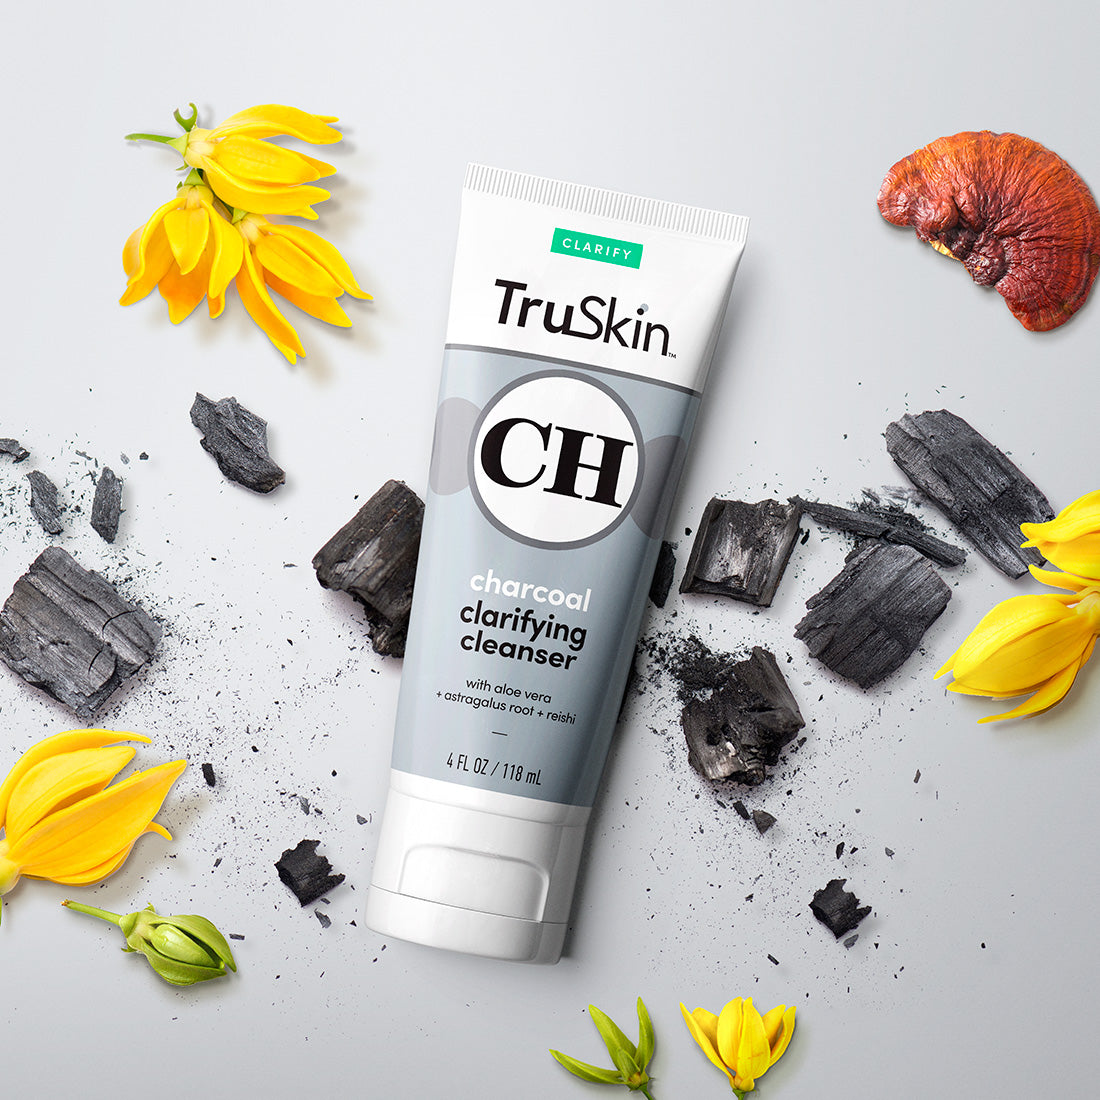 Charcoal Clarifying Cleanser